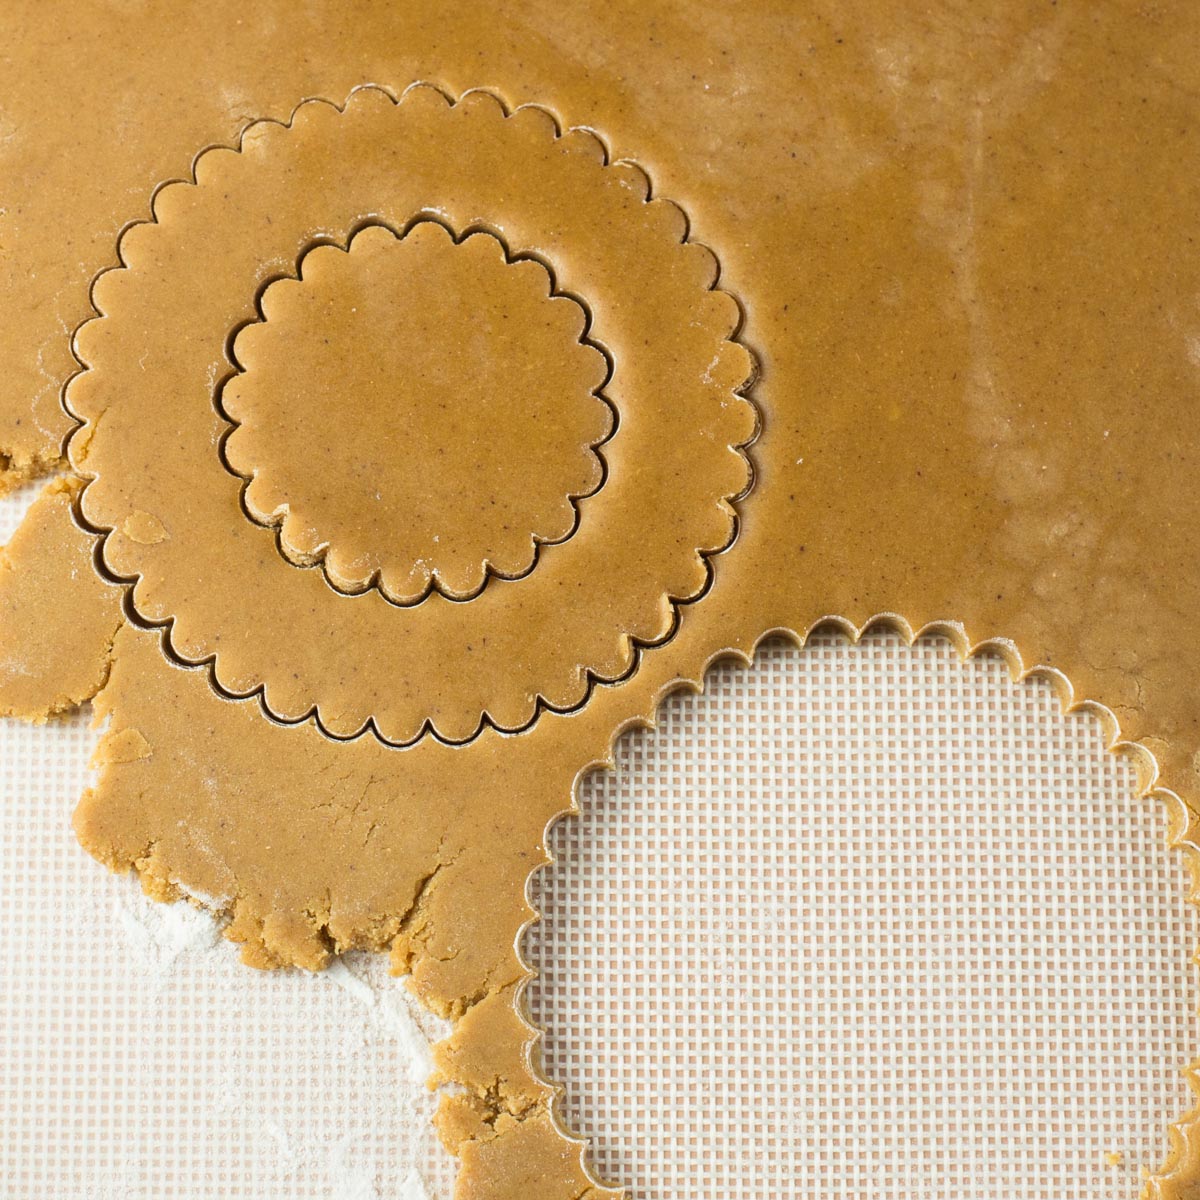 Gingerbread dough with circle shapes cut out.